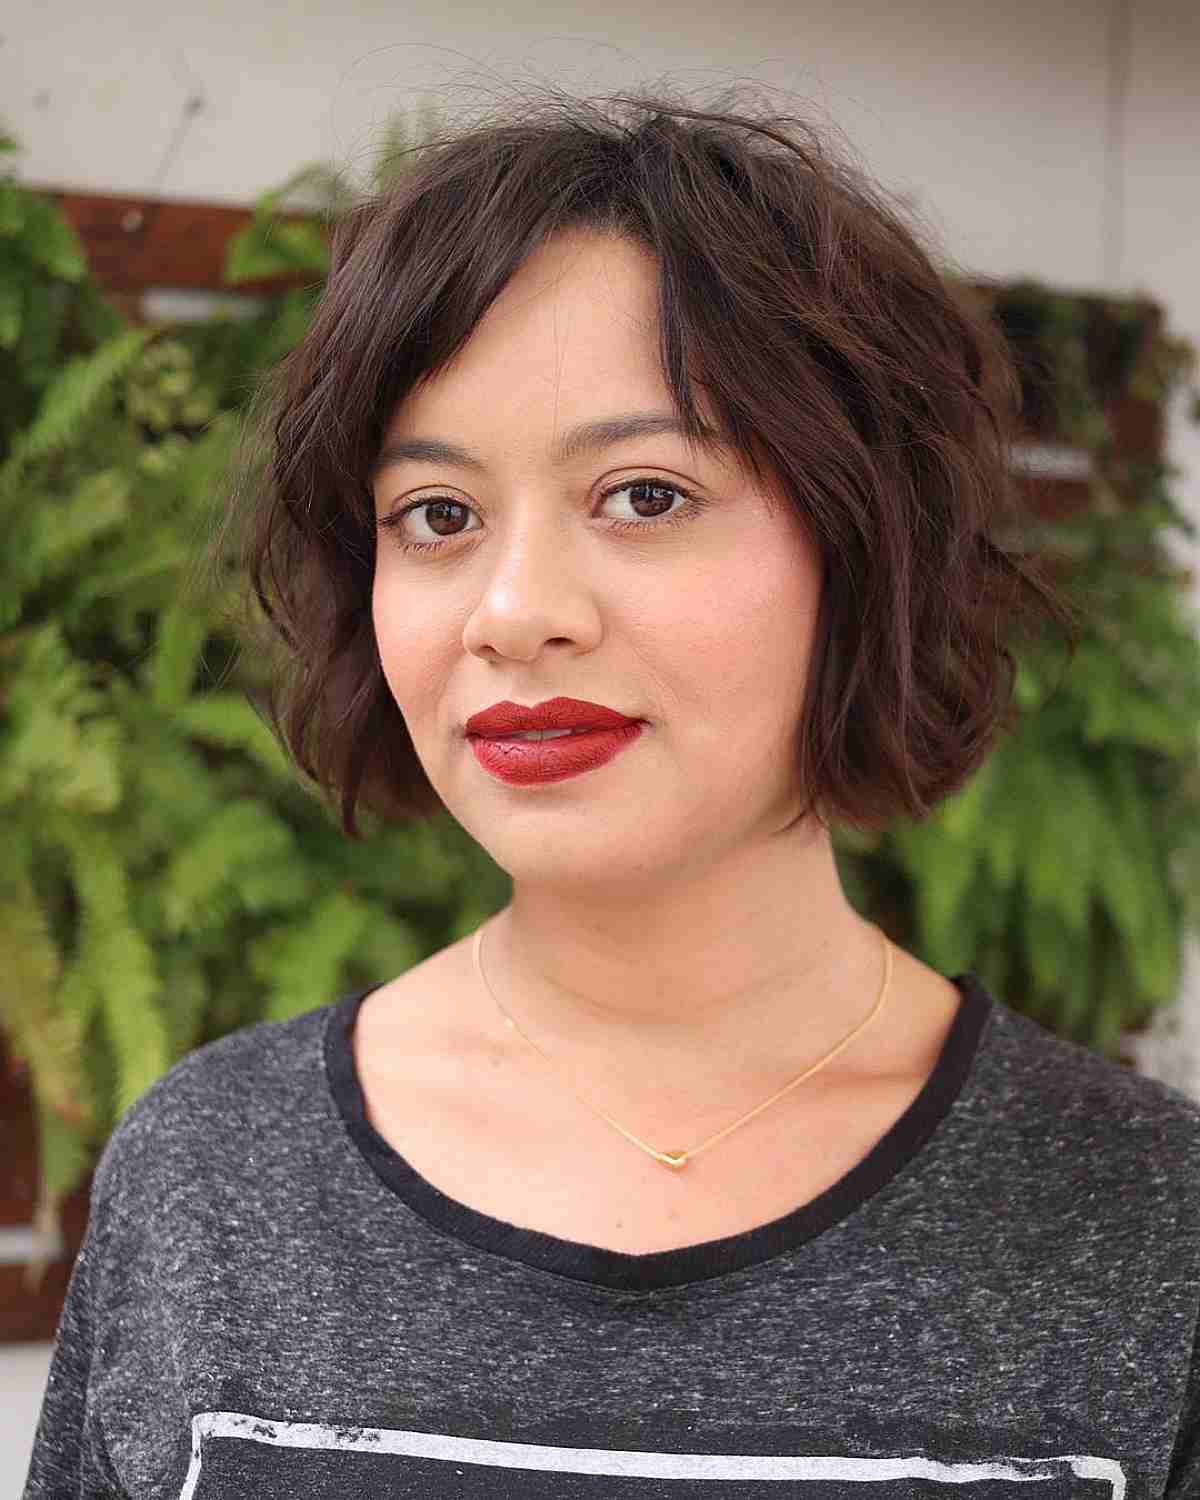 Short Textured Wavy Bob Cut with a Side Part and Bangs